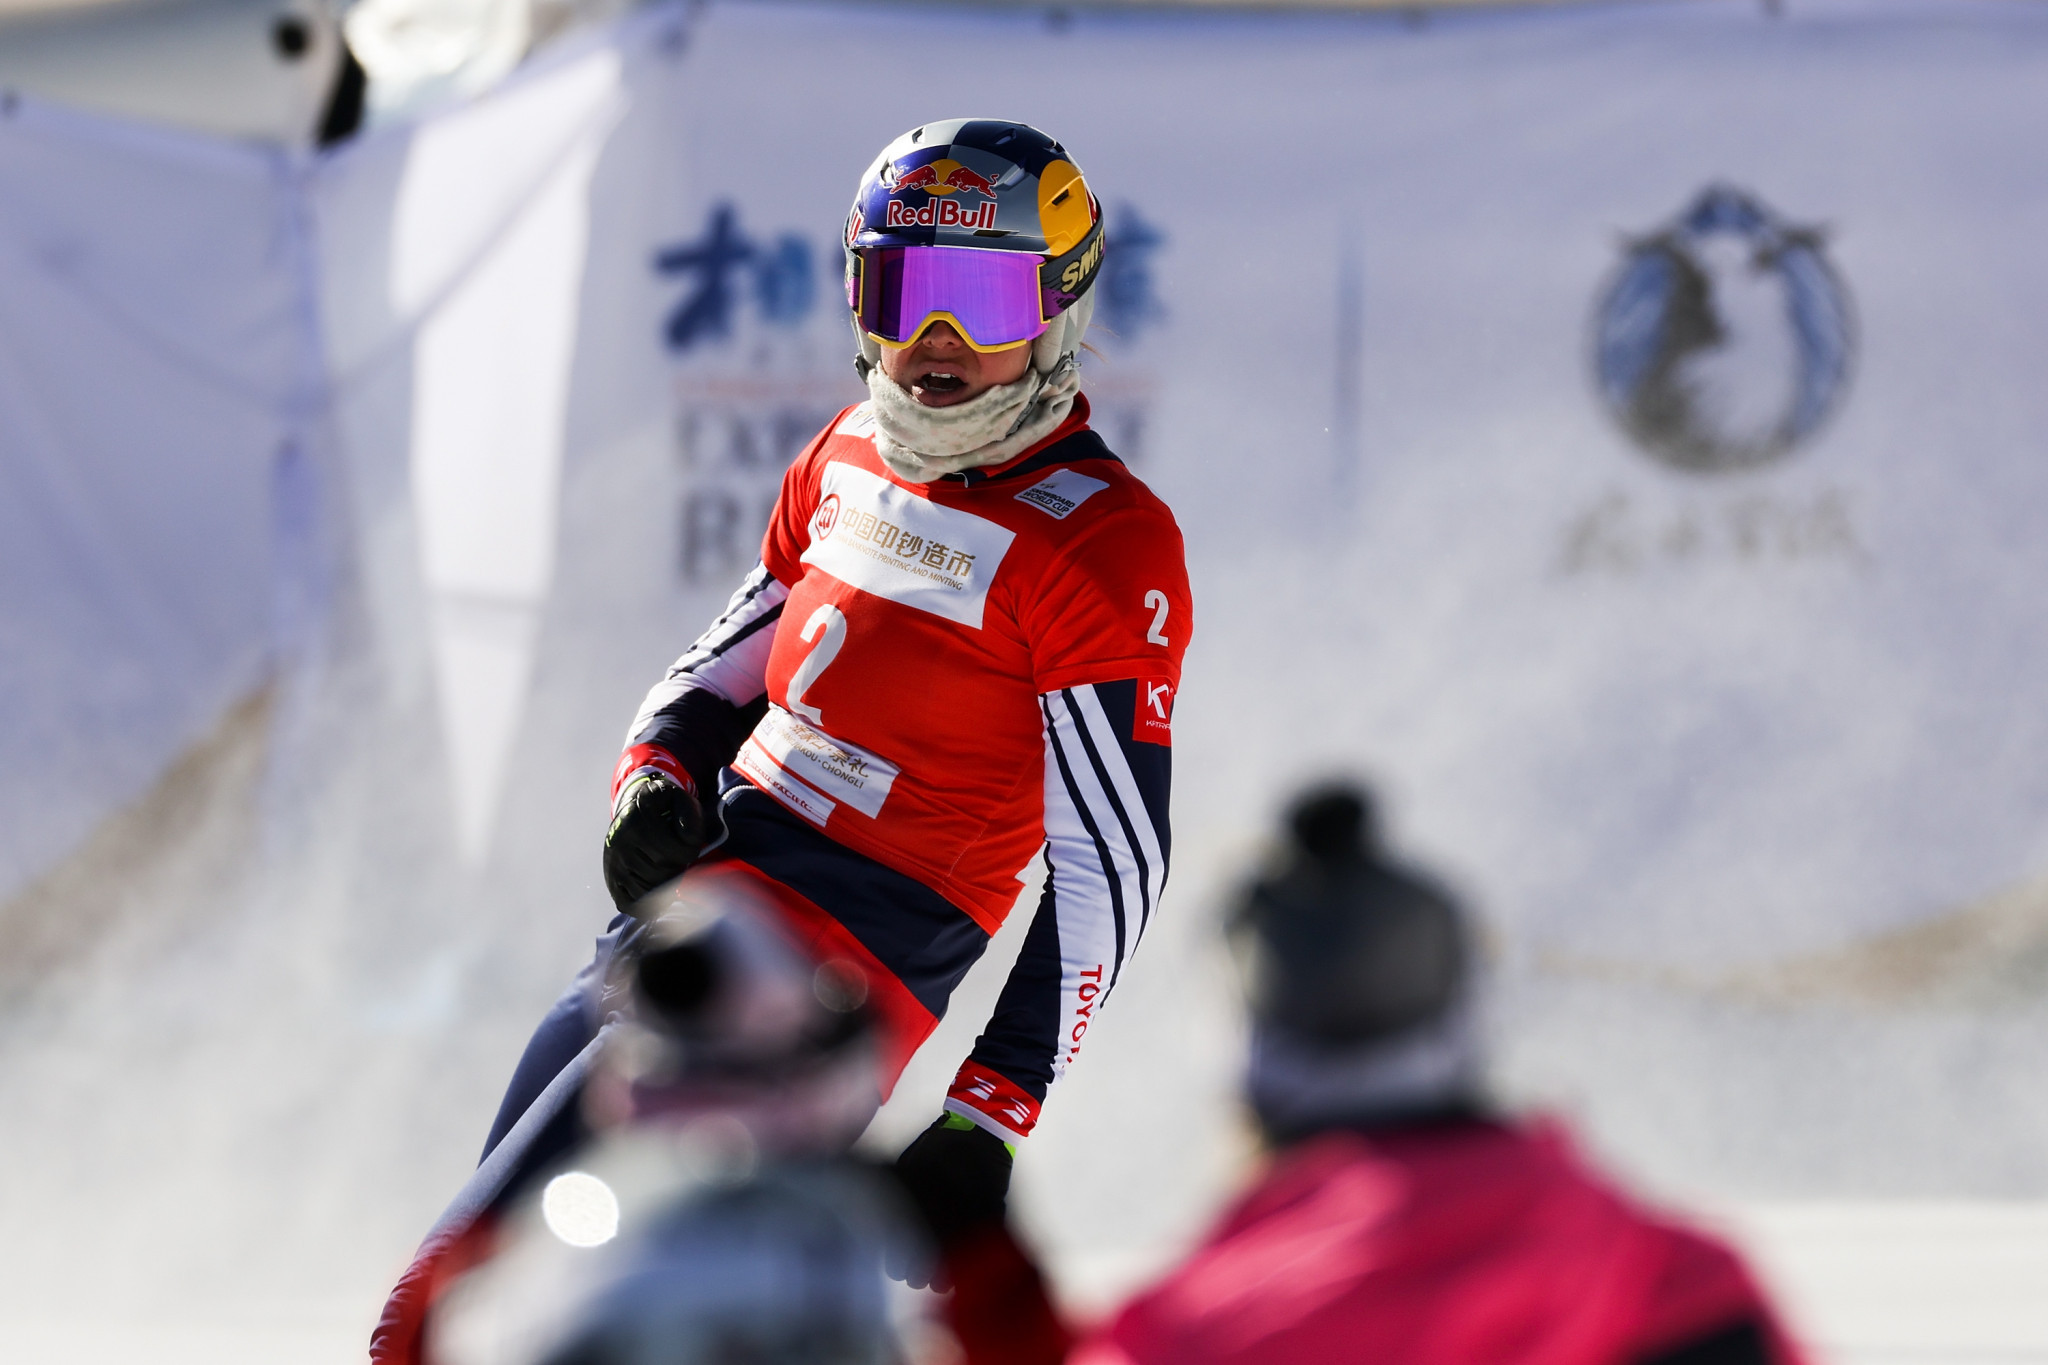 Reigning FIS Snowboard Cross World Cup champion Samková leads qualification at Beijing 2022 test event